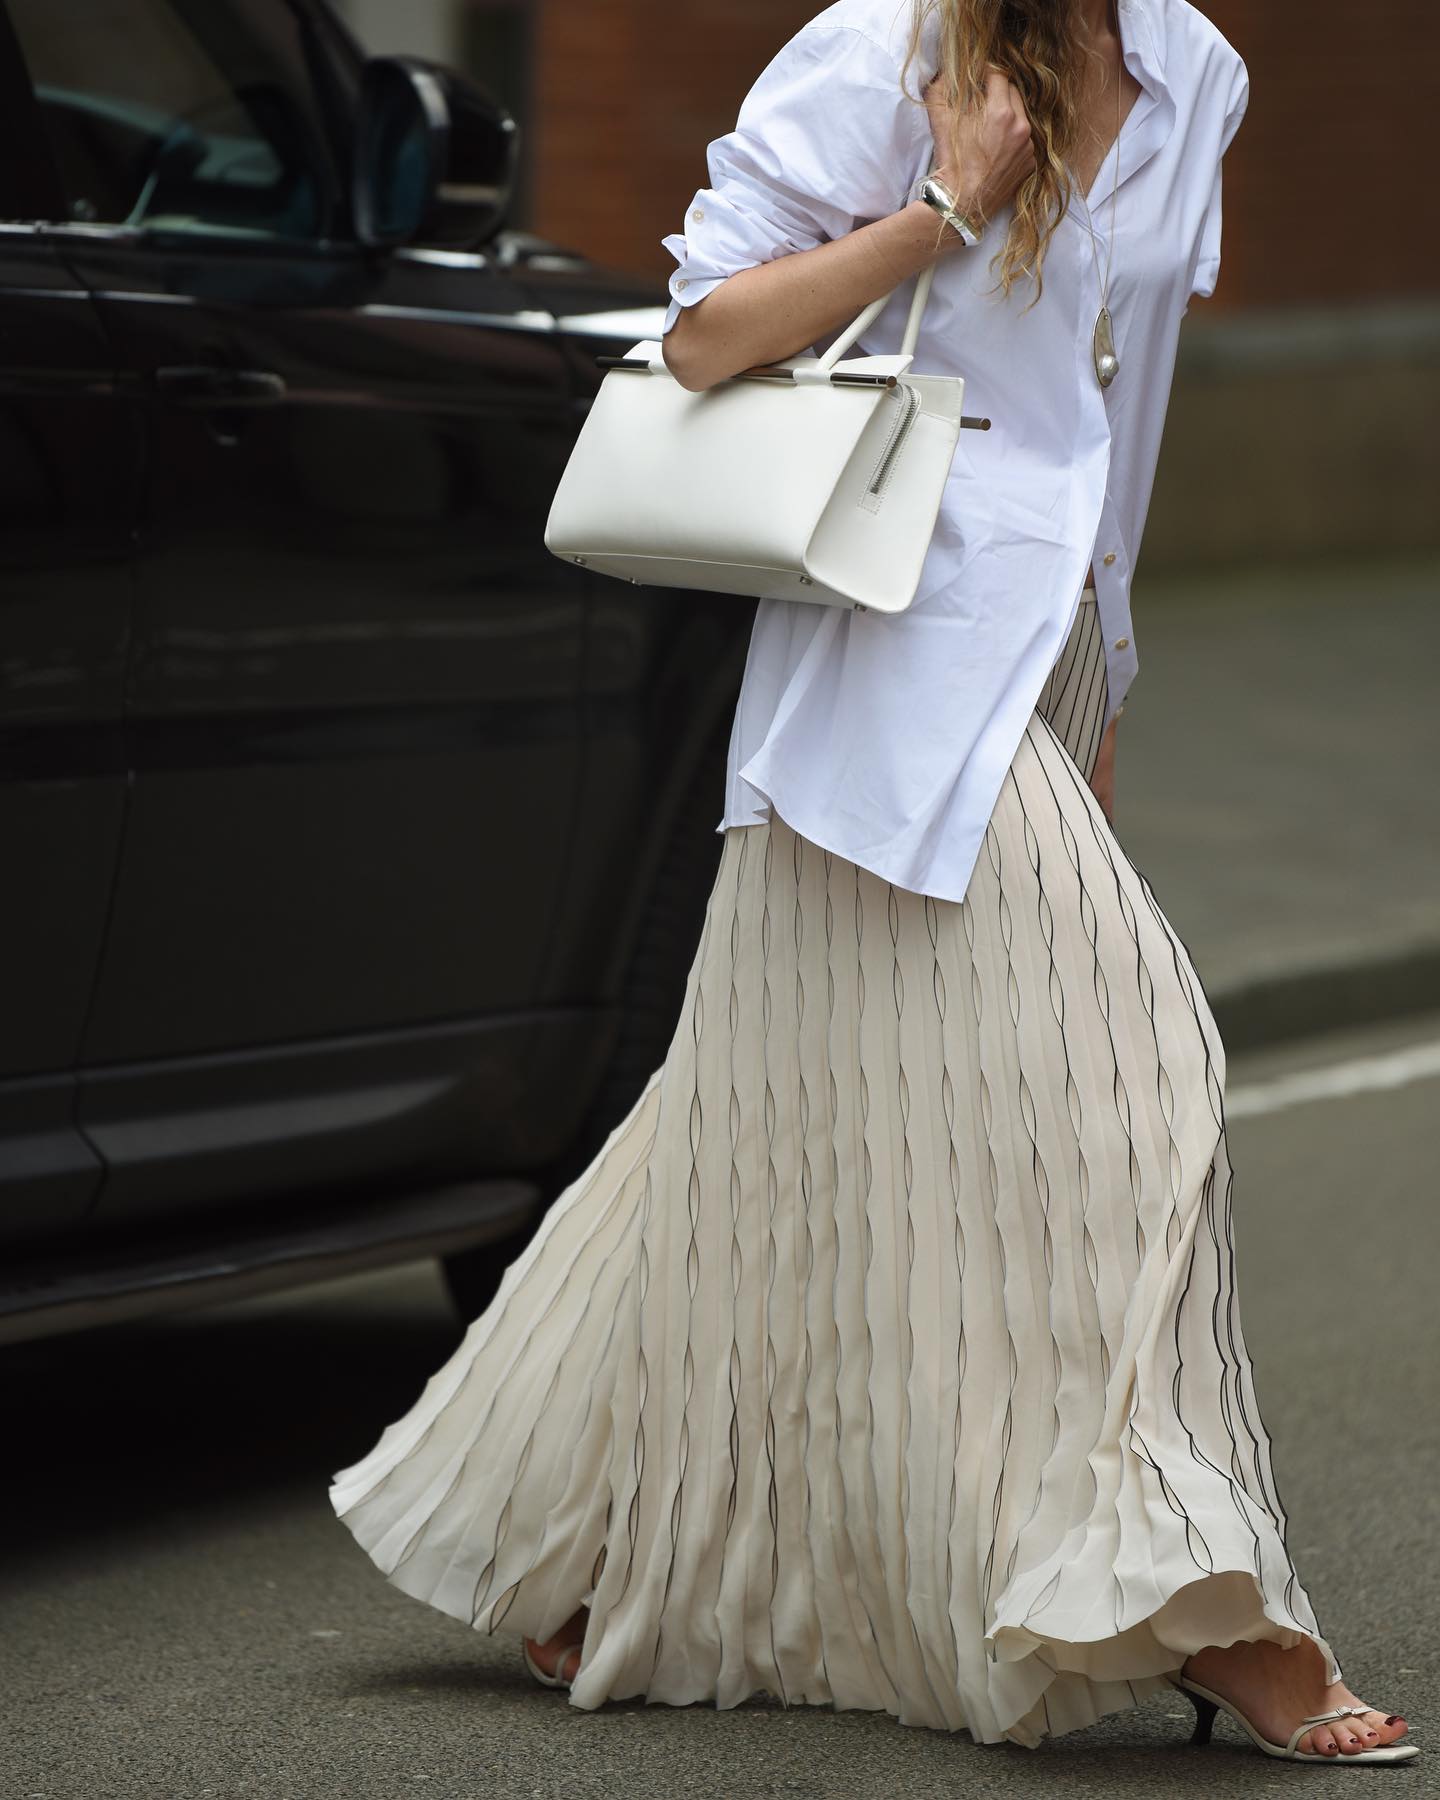 A woman wearing a white shirt and a skirt